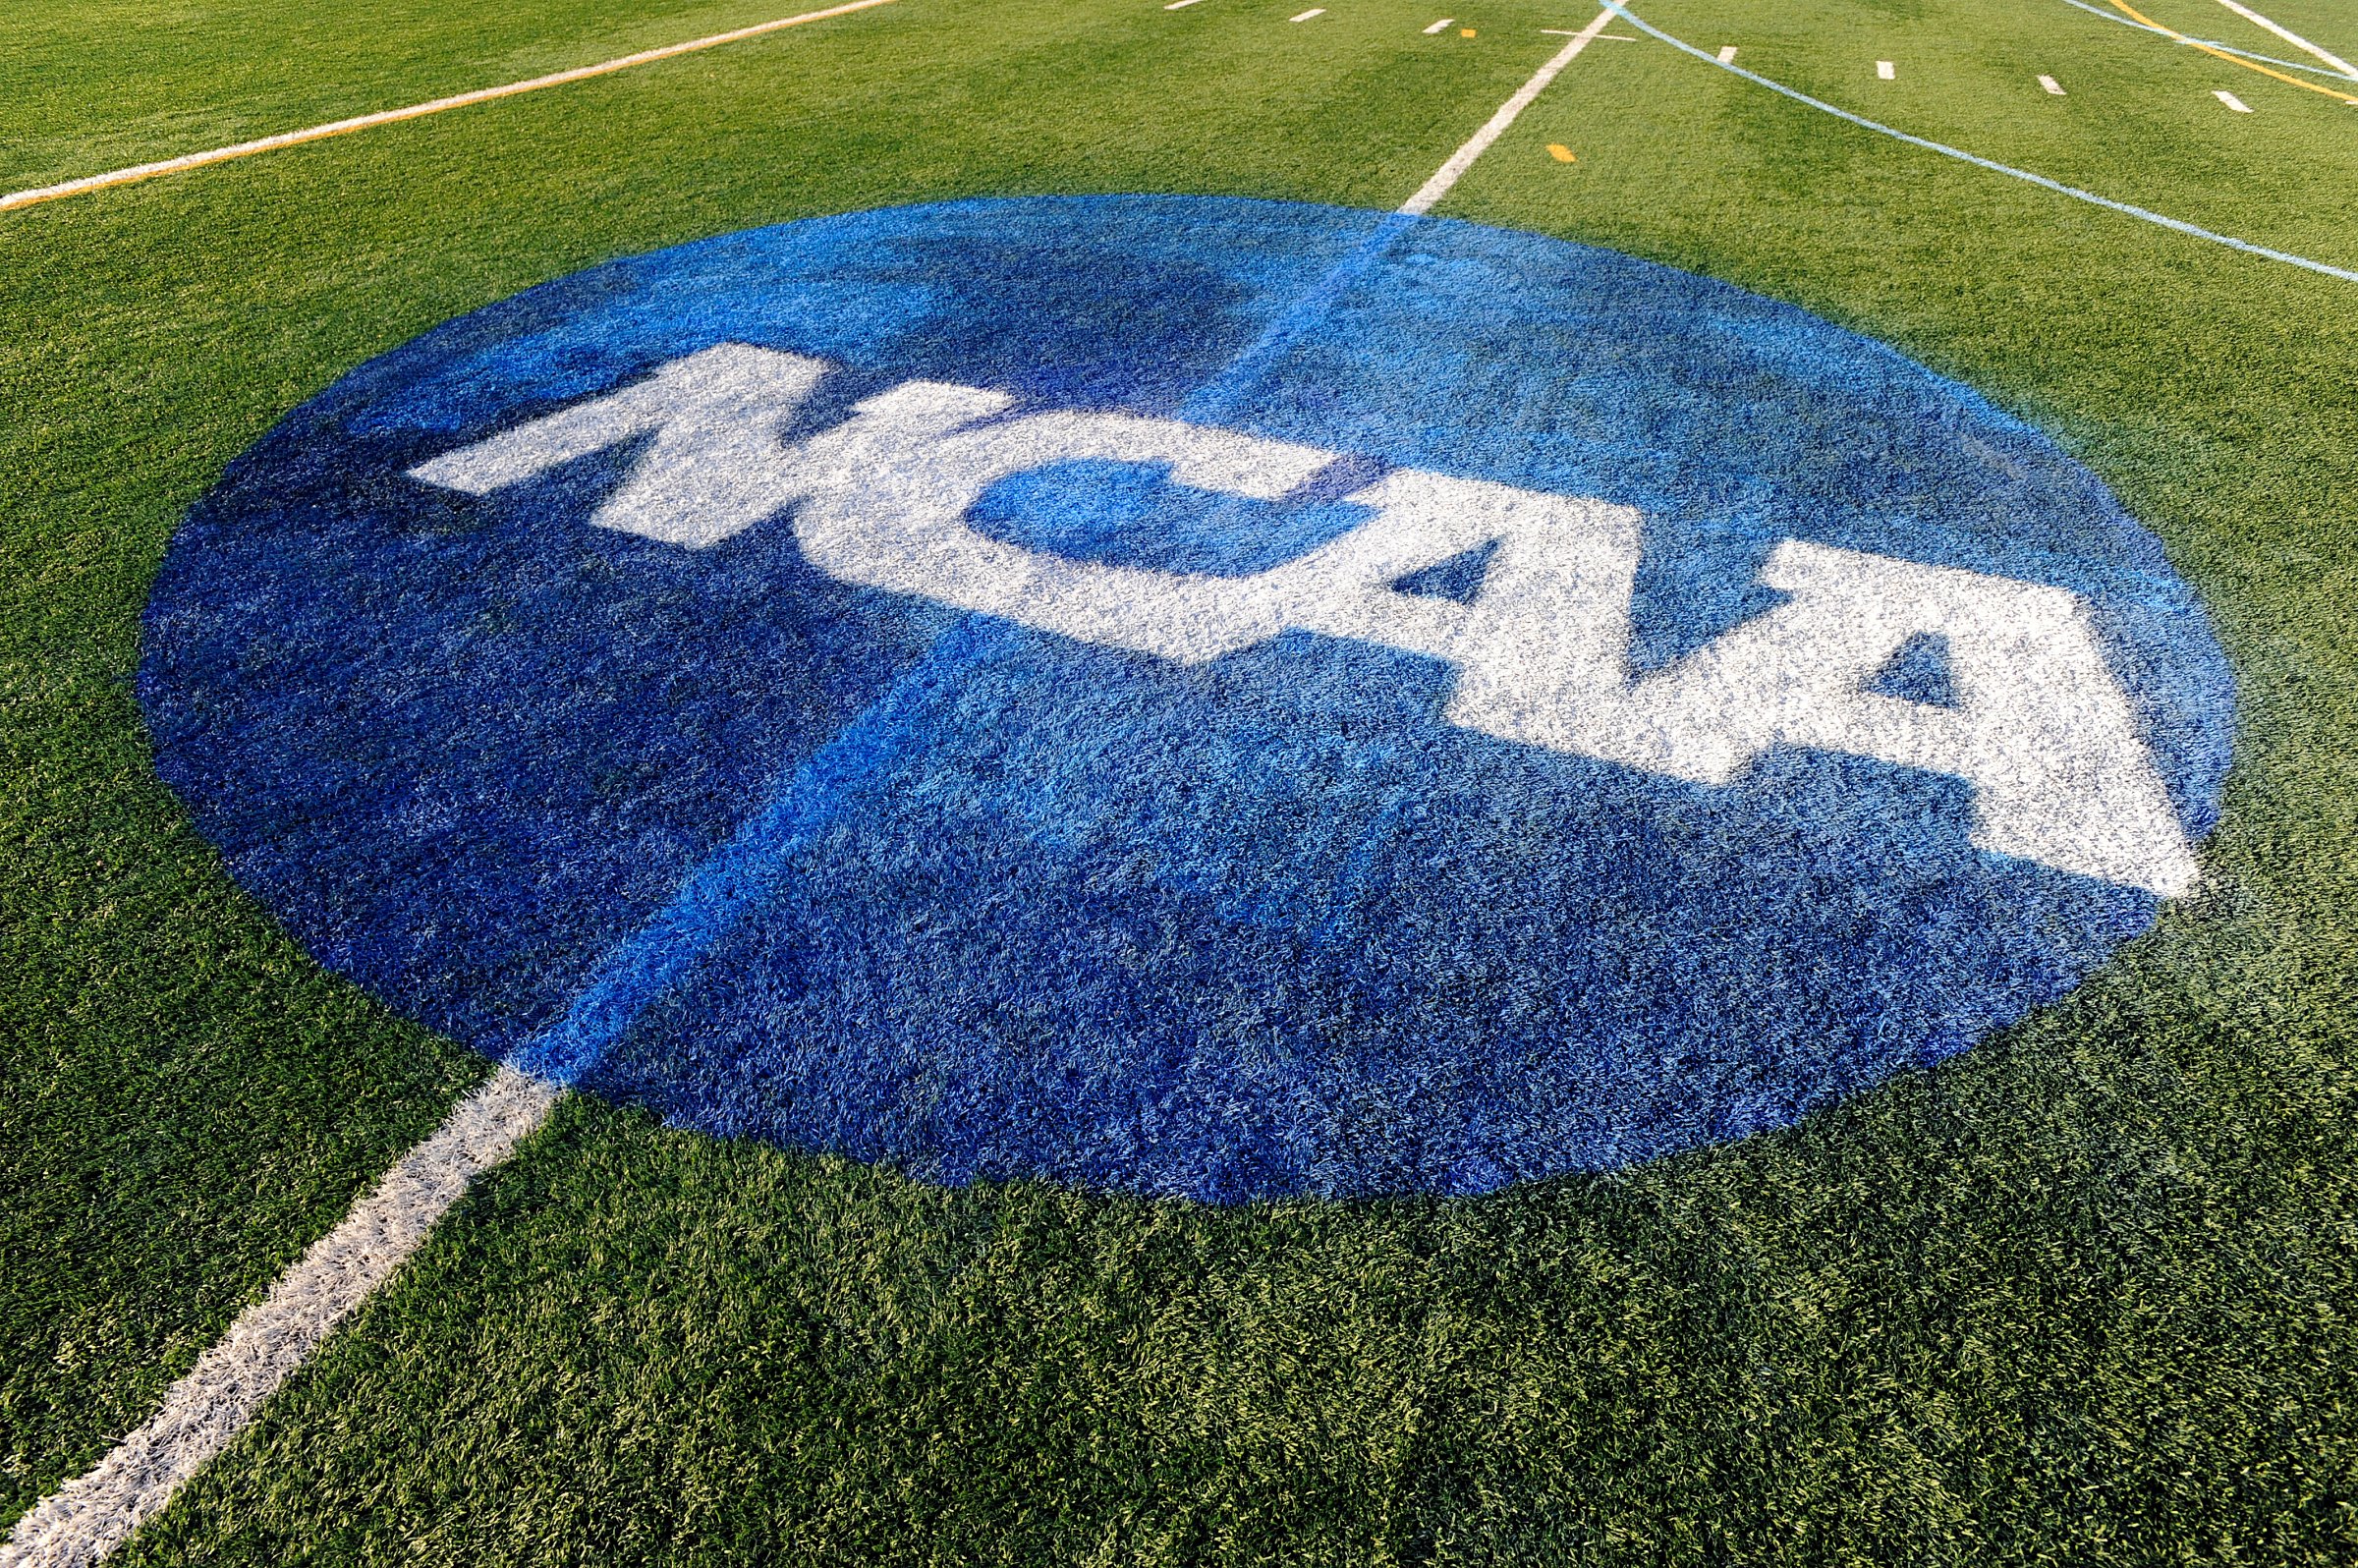 The NCAA logo is shown on the field where the Maryland Terrapins played against the North Carolina Tar Heels during the 2013 NCAA Division I Women's Lacrosse Championship at Villanova Stadium on May 26, 2013 in Villanova, Pennsylvania.